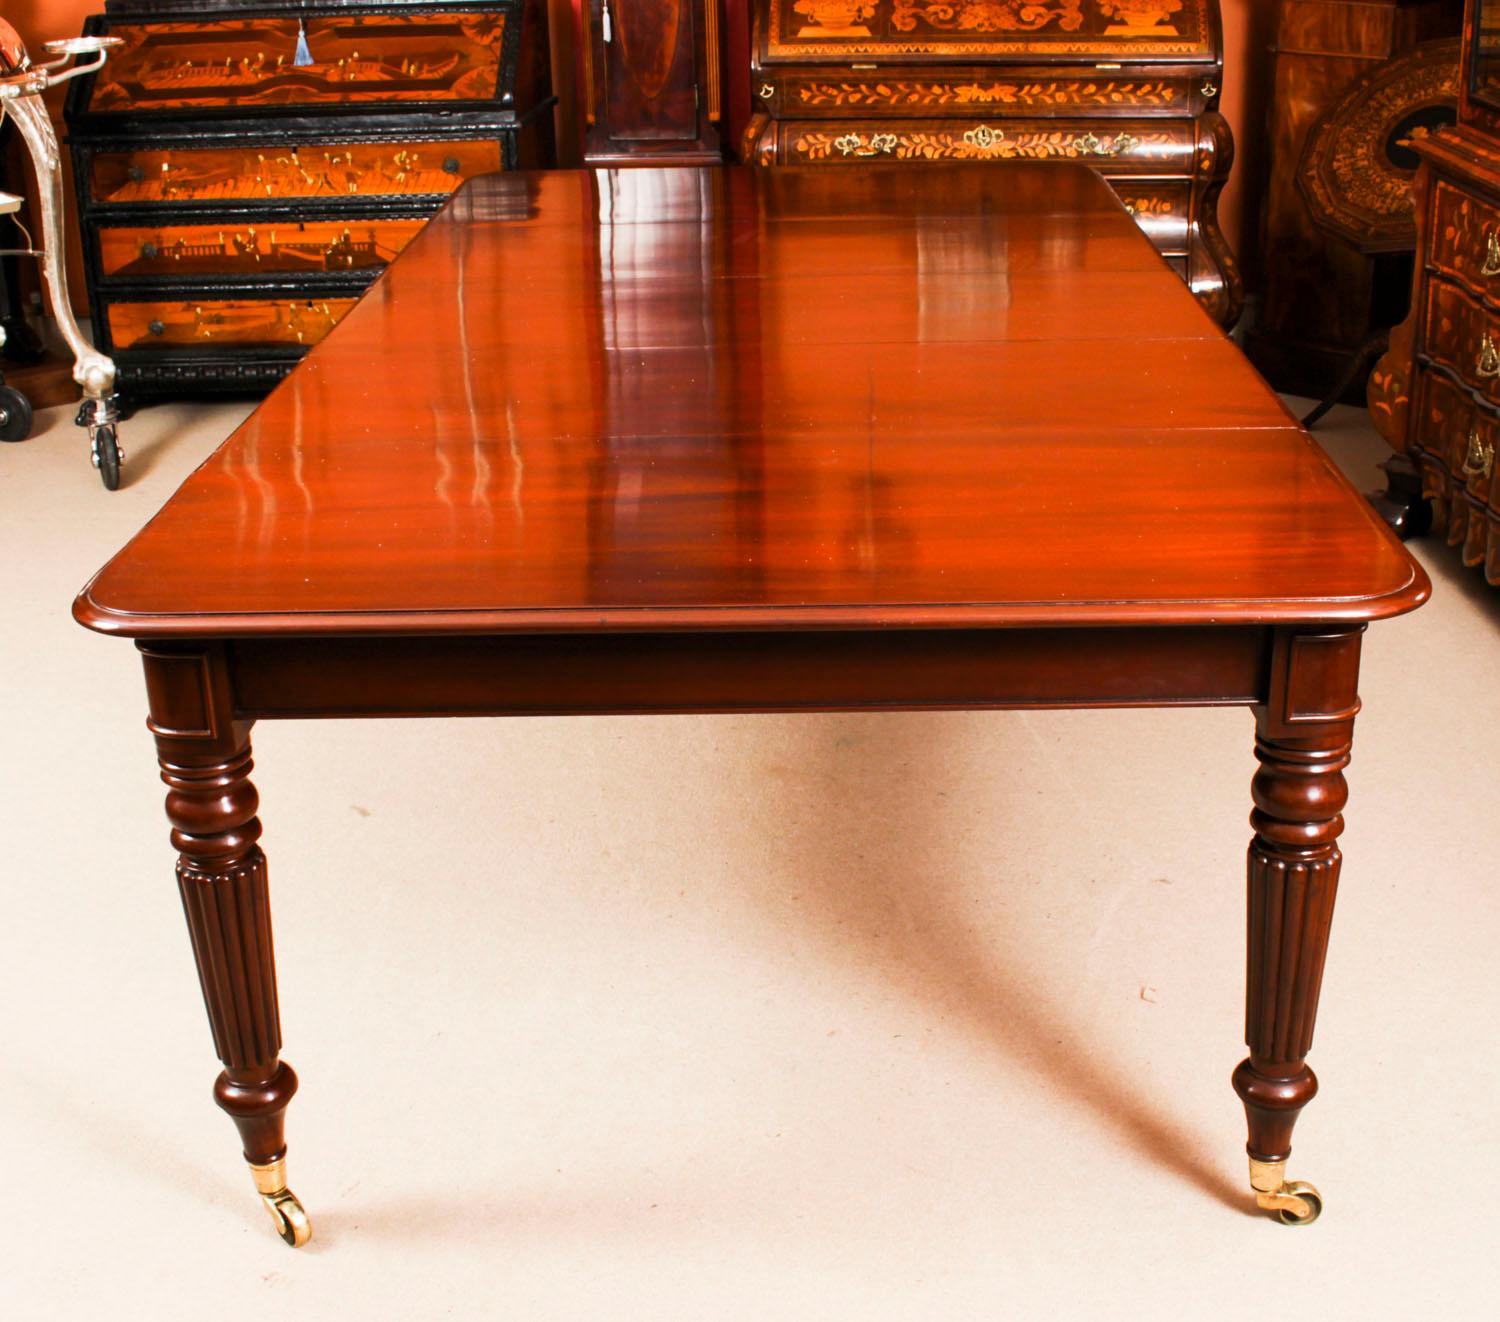 A very rare opportunity to own an antique English Regency dining room table, Circa 1820 in date, which can seat ten people in comfort.

The table is made of beautiful solid flame mahogany. This can be seen in the photos of the top with it's